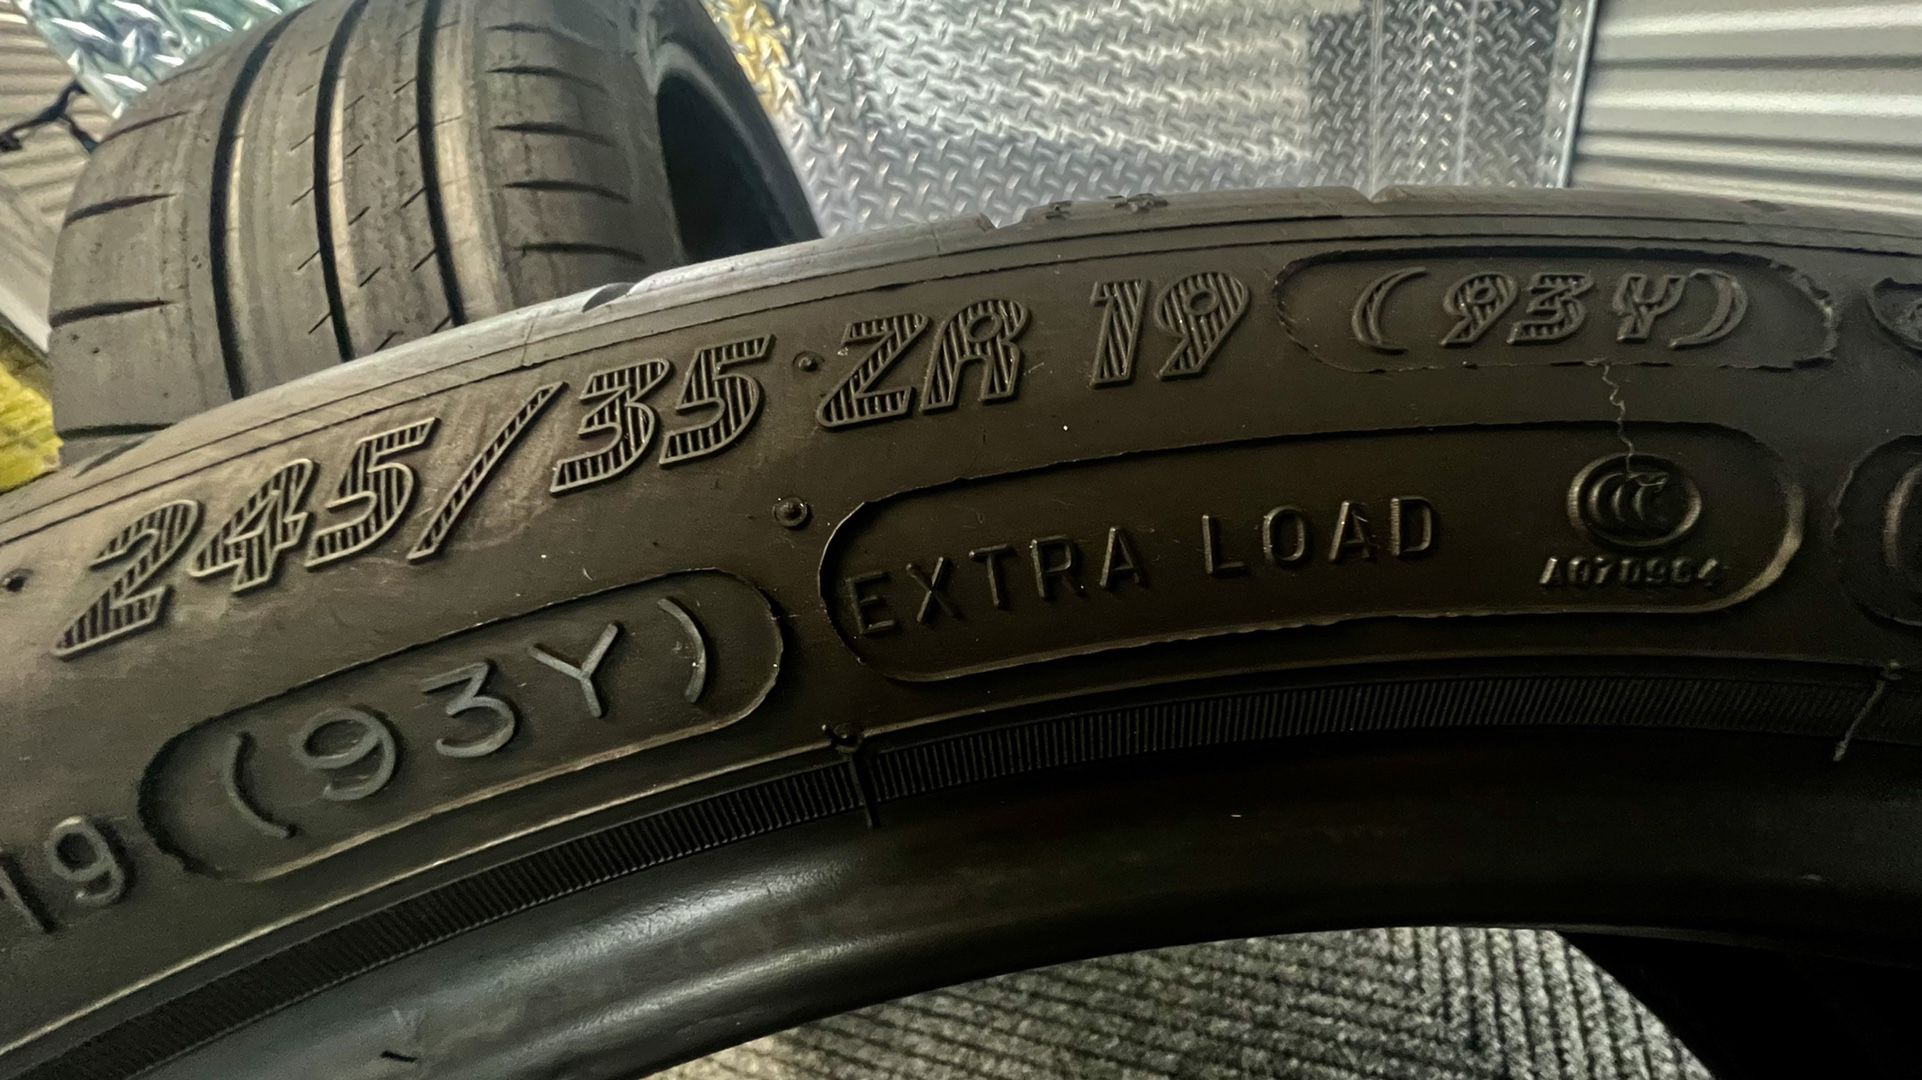 245/35/19 Michelin Cup2 Pair Of 2 Tires